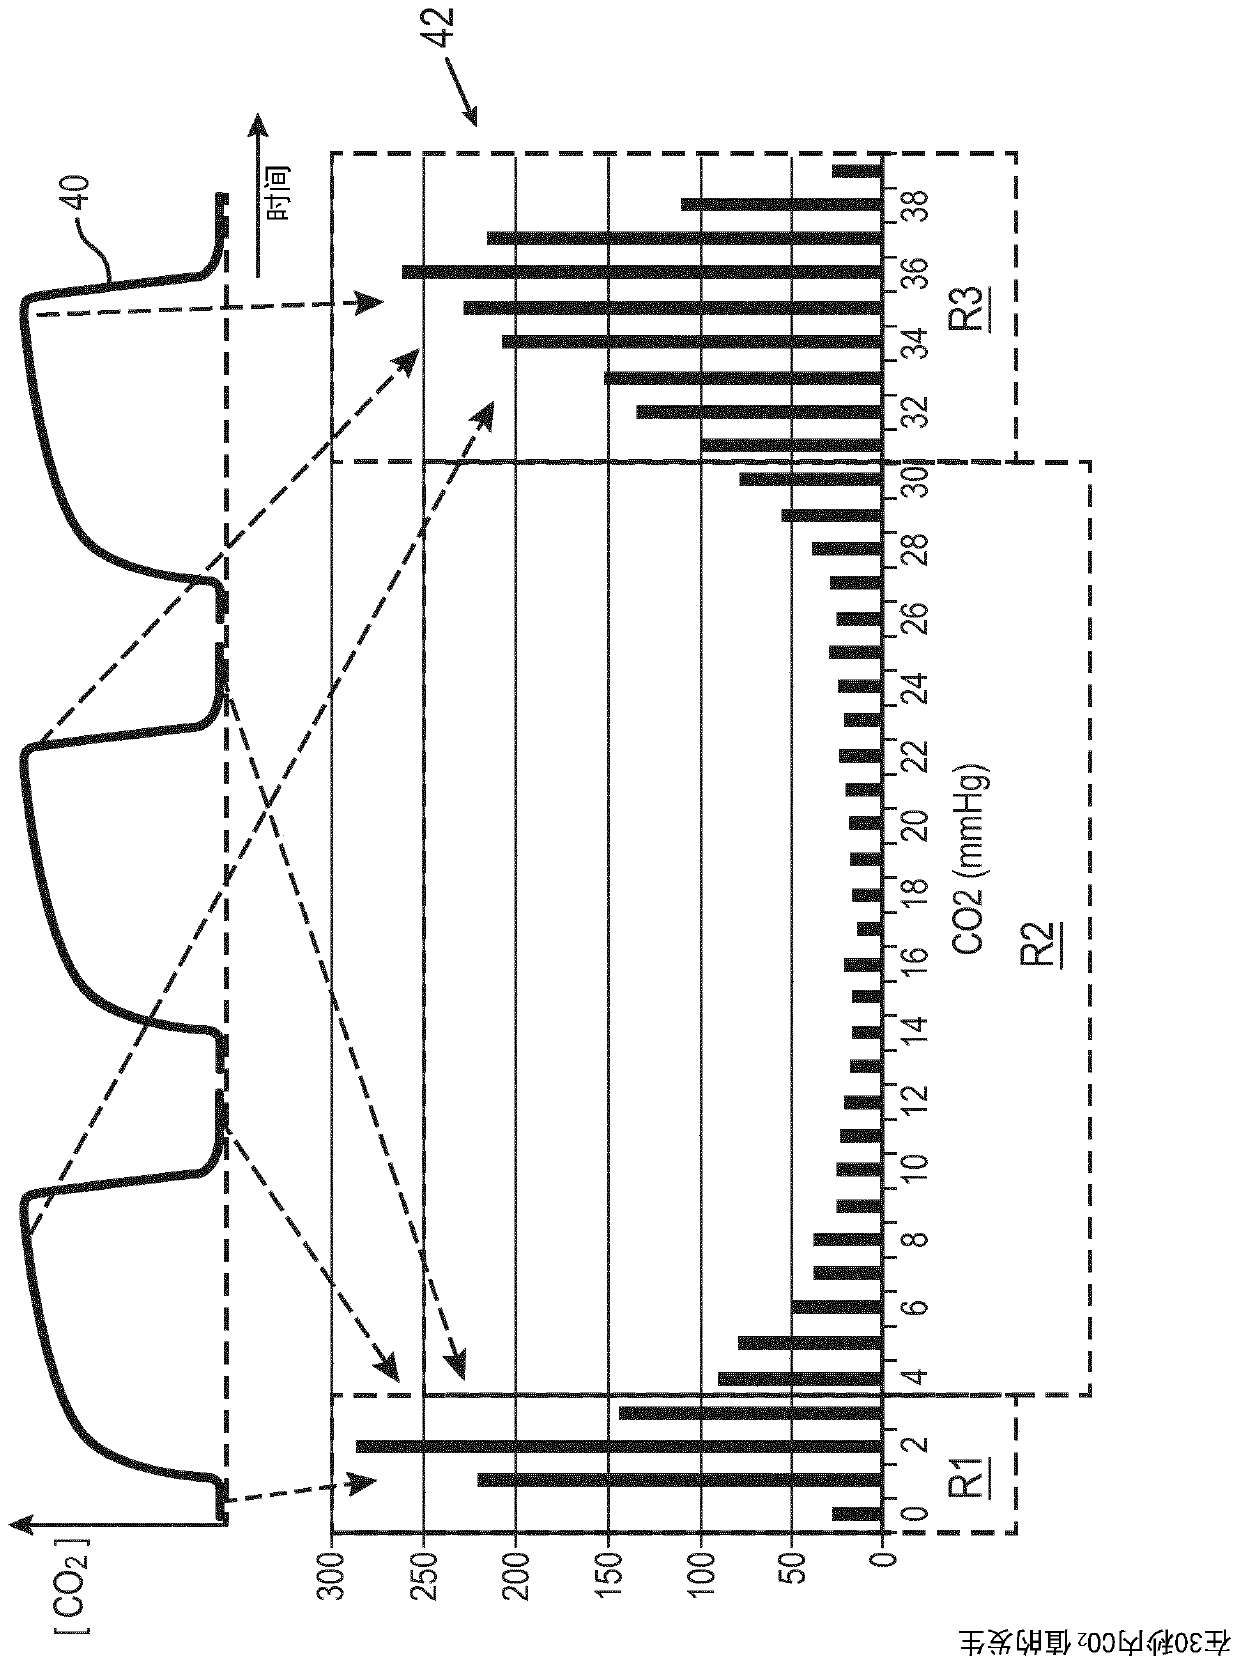 Physiologic monitoring decision support system combining capnometry and oxygen saturation